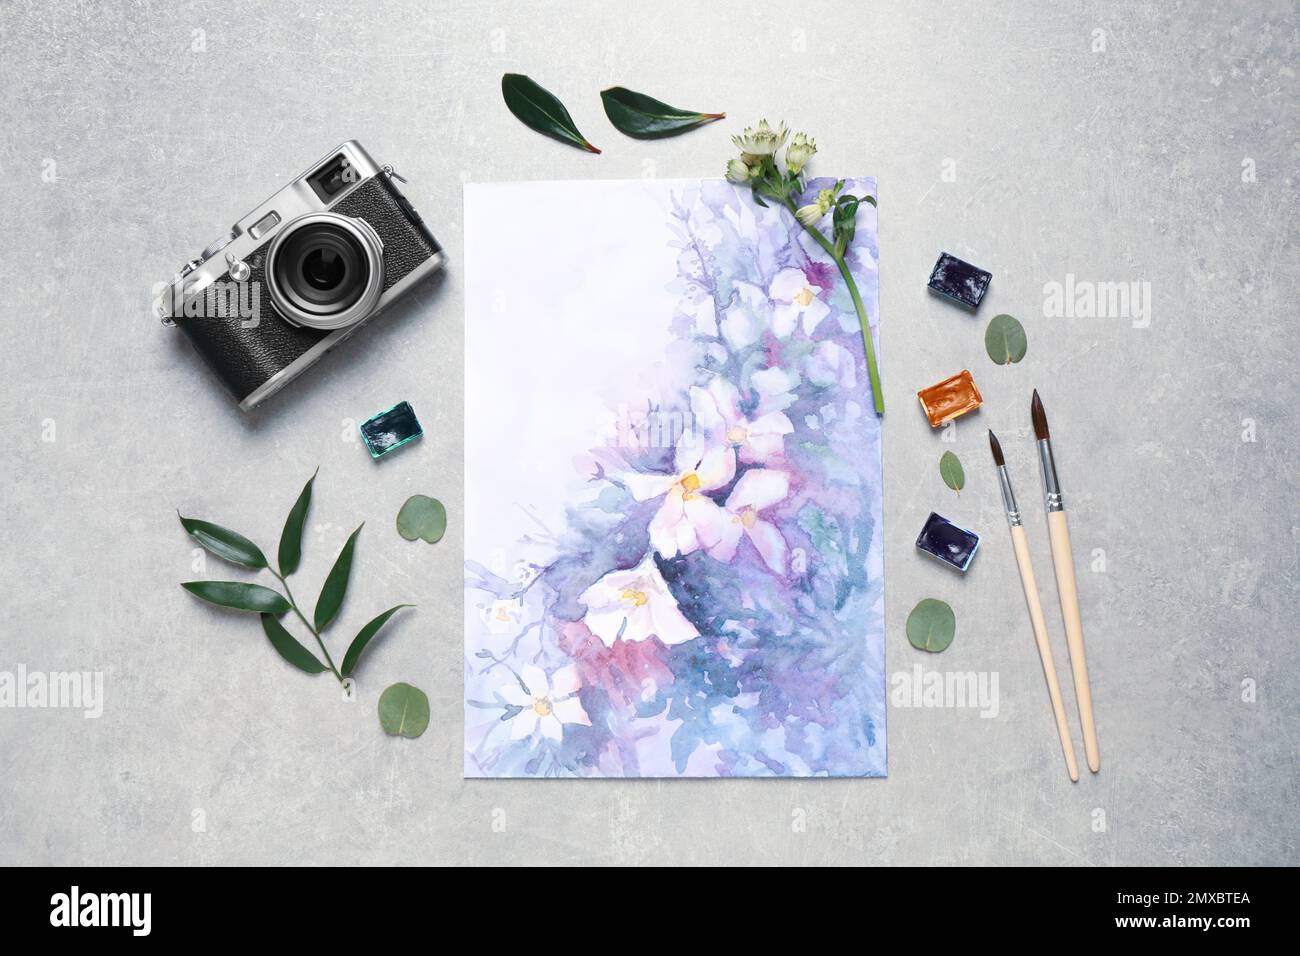 Flat lay composition with watercolor paints and floral picture on grey stone table Stock Photo